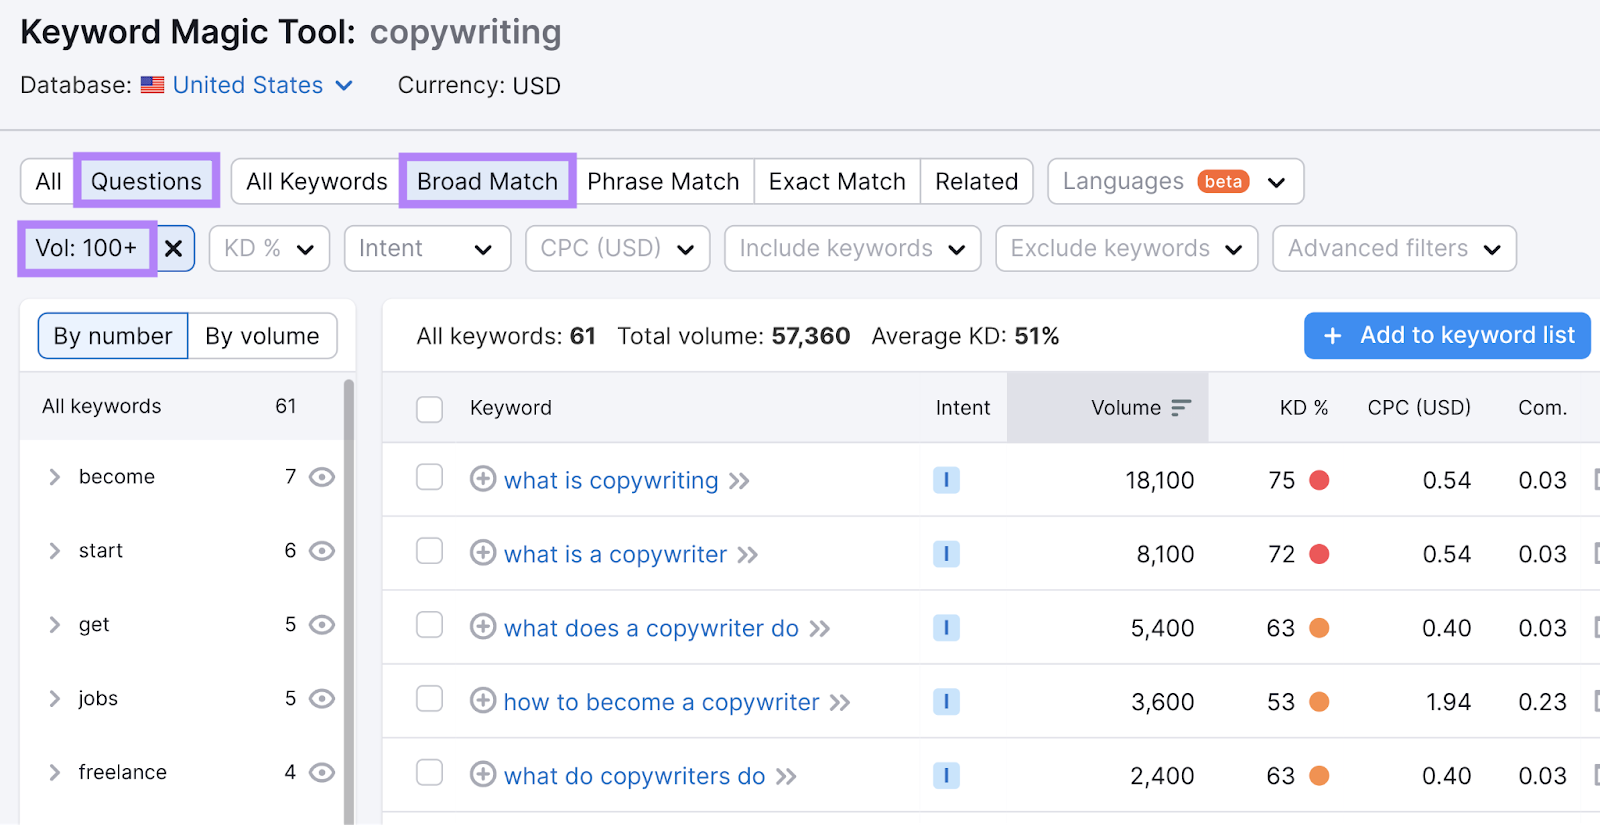 "Questions," "Broad Match," and "Vol: 100+" filters applied in Keyword Magic Tool